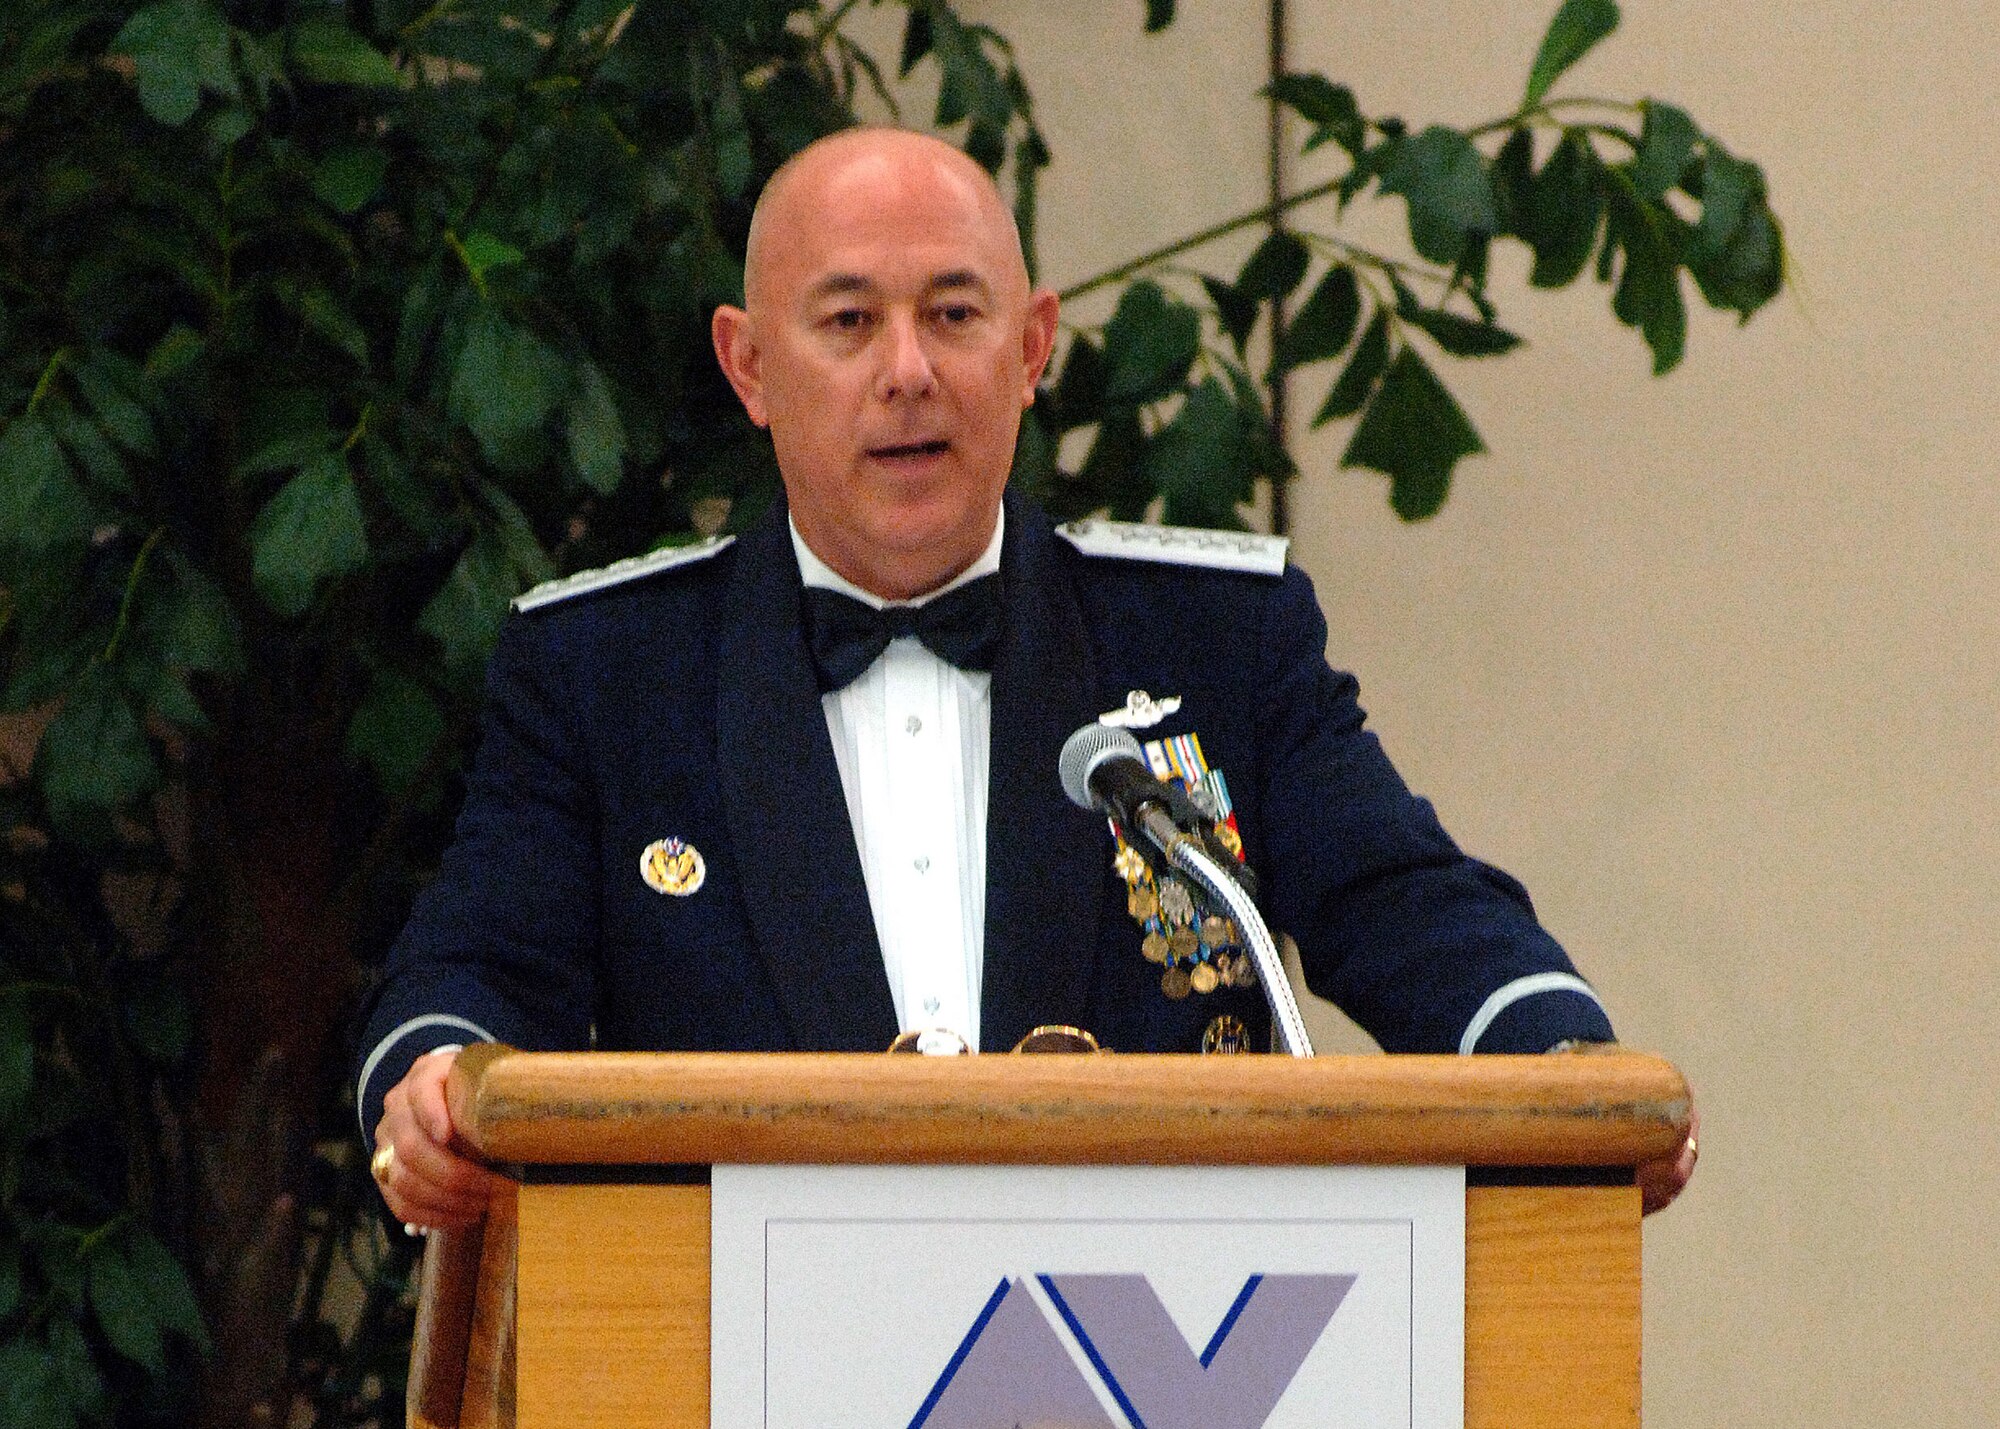 Air Force Chief of Staff, General T. Michael Moseley speaks at the Air Force Villages dinner Oct. 20, 2006 at Lackland Air Force Base, Texas. The Villages offer premier active living communities for retired and honorably seperated officers and their spouses, widows and widowers over the age of 62. (U.S. Air Force photo/Tech. Sgt. Larry A. Simmons)